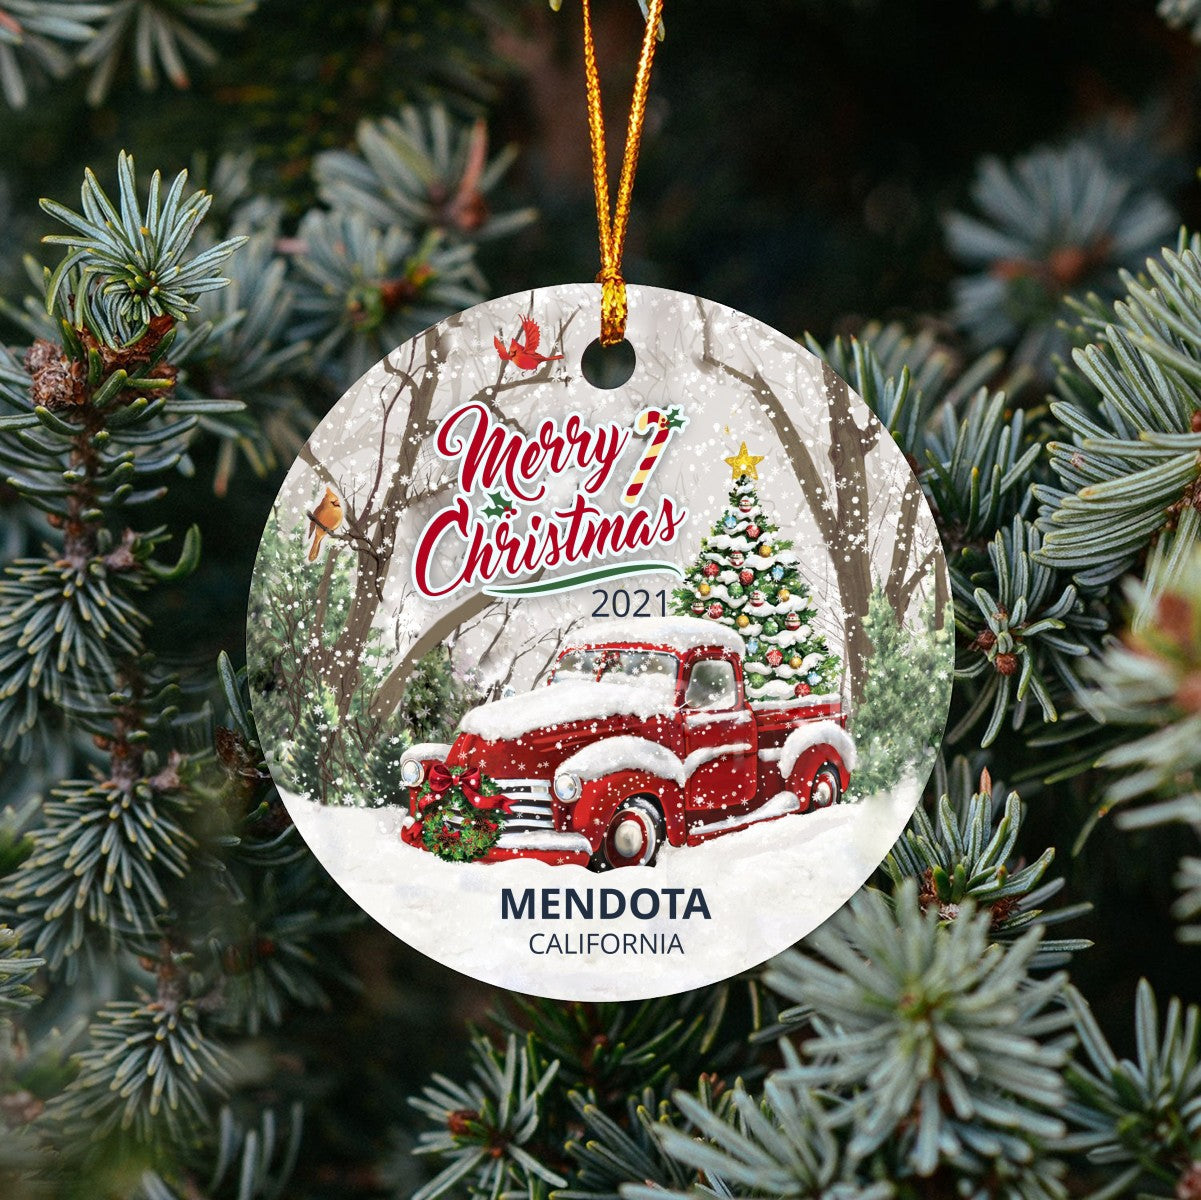 Christmas Tree Ornaments Mendota - Ornament With Name City, State Mendota California CA Ornament - Red Truck Xmas Ornaments 3'' Plastic Gift For Family, Friend And Housewarming